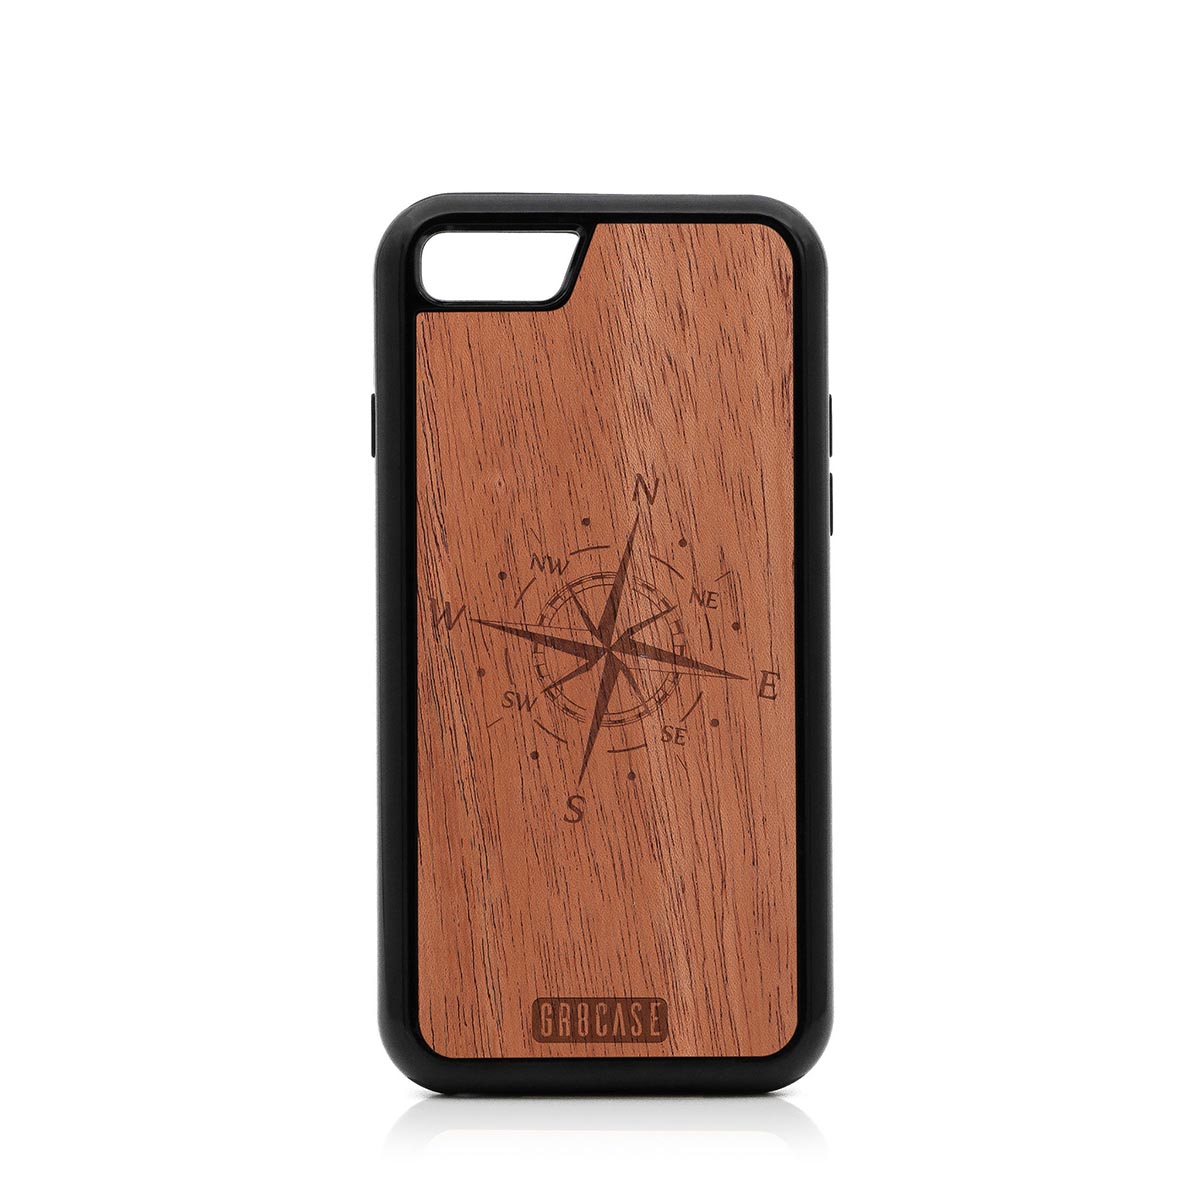 Compass Design Wood Case For iPhone 7/8 by GR8CASE